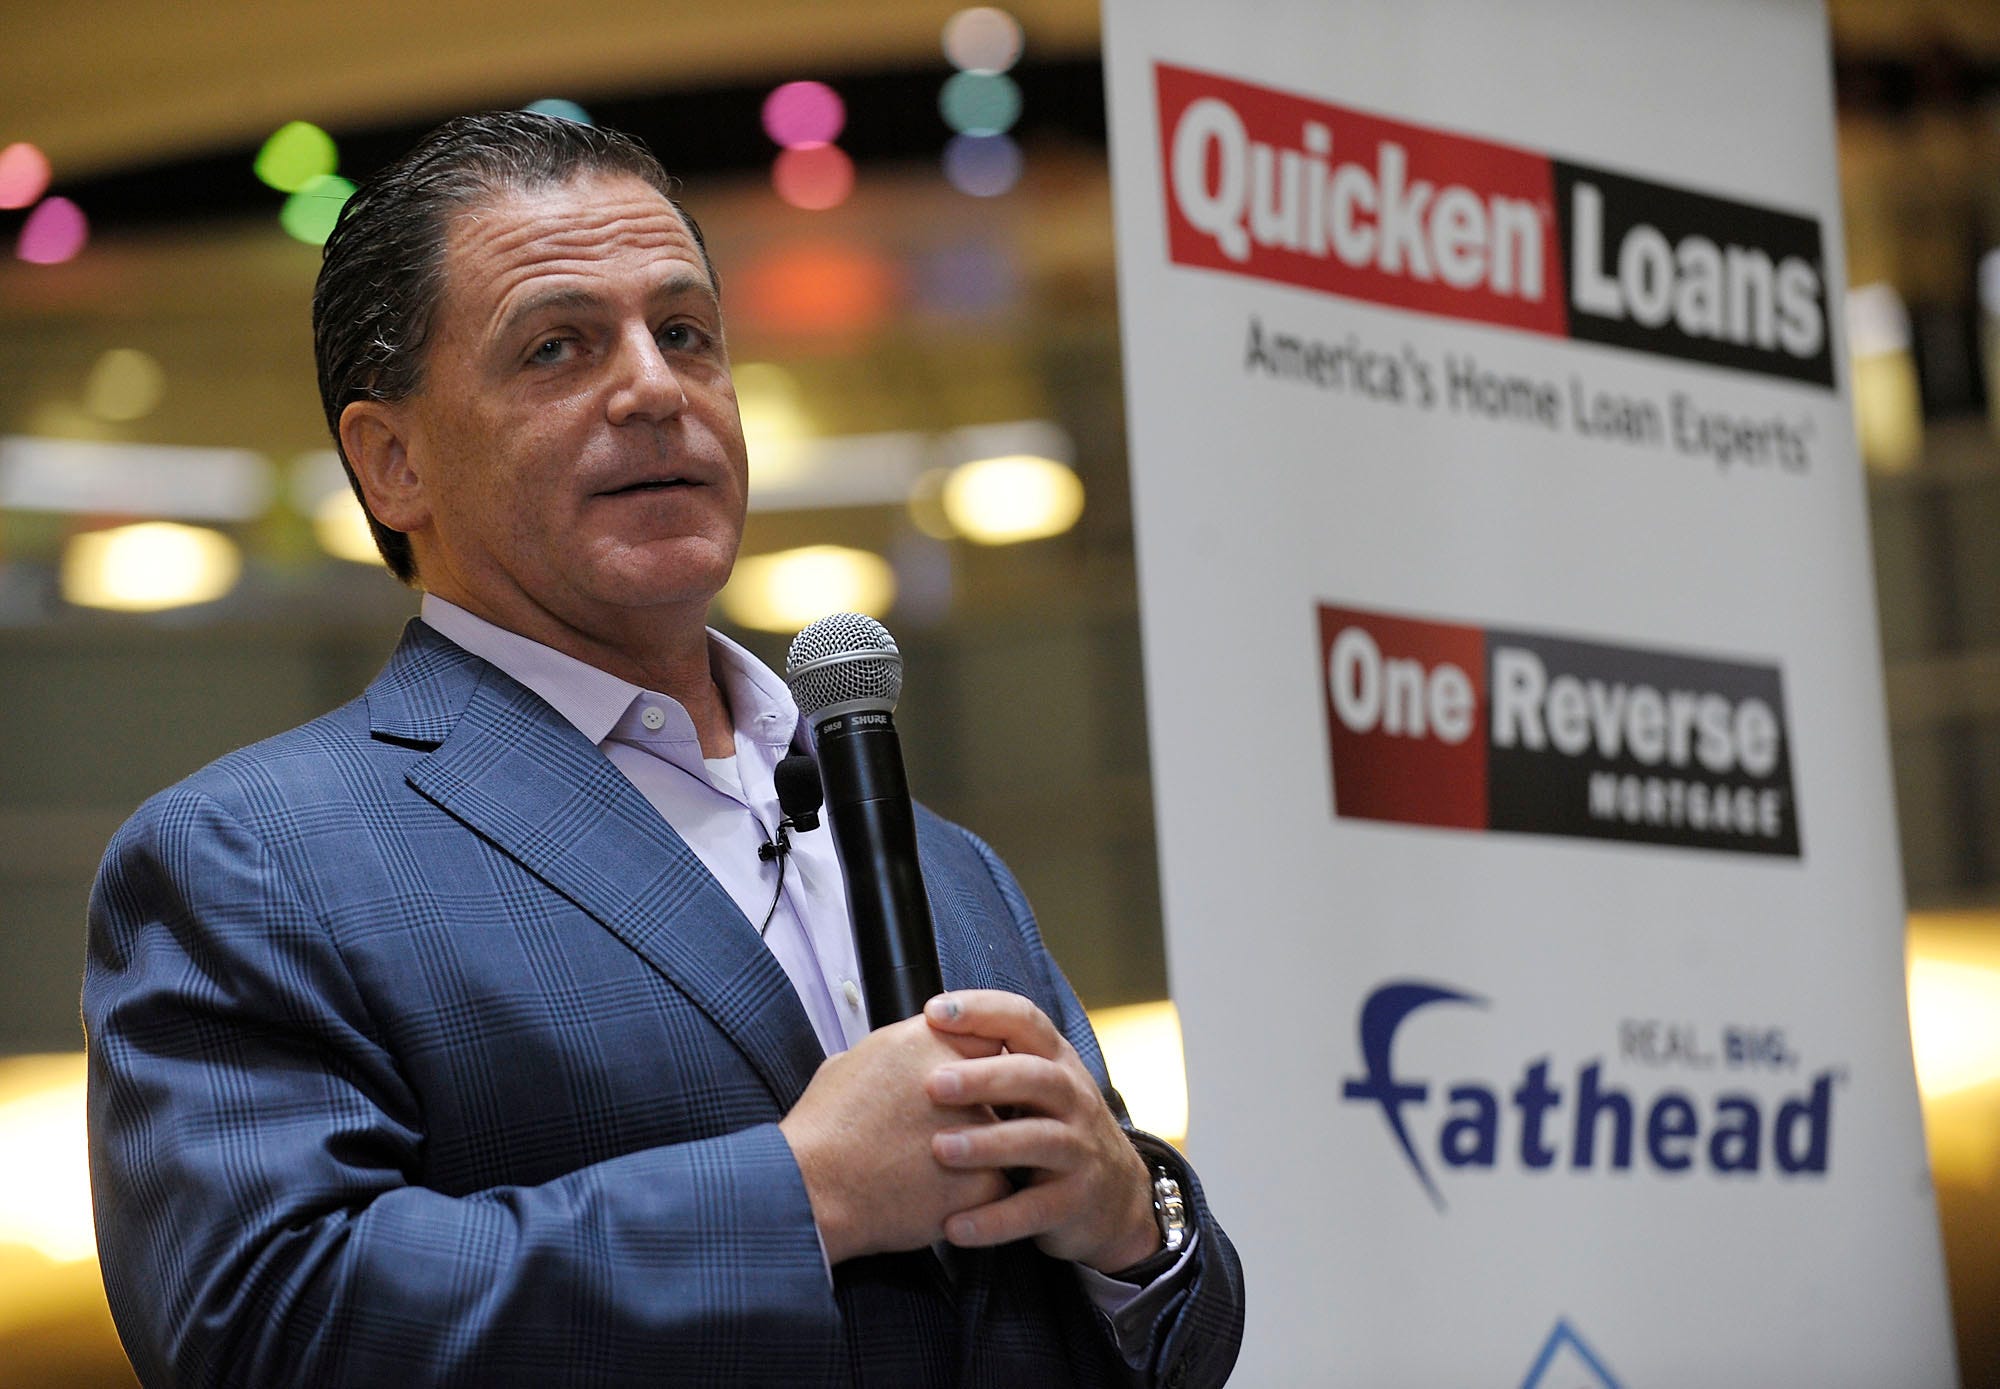 Dan Gilbert, founder and chairman of Quicken Loans, addresses his employees during a press conference on the first day of Quicken Loan's new downtown headquarters in four floors of the Compuware building. August 16, 2010.